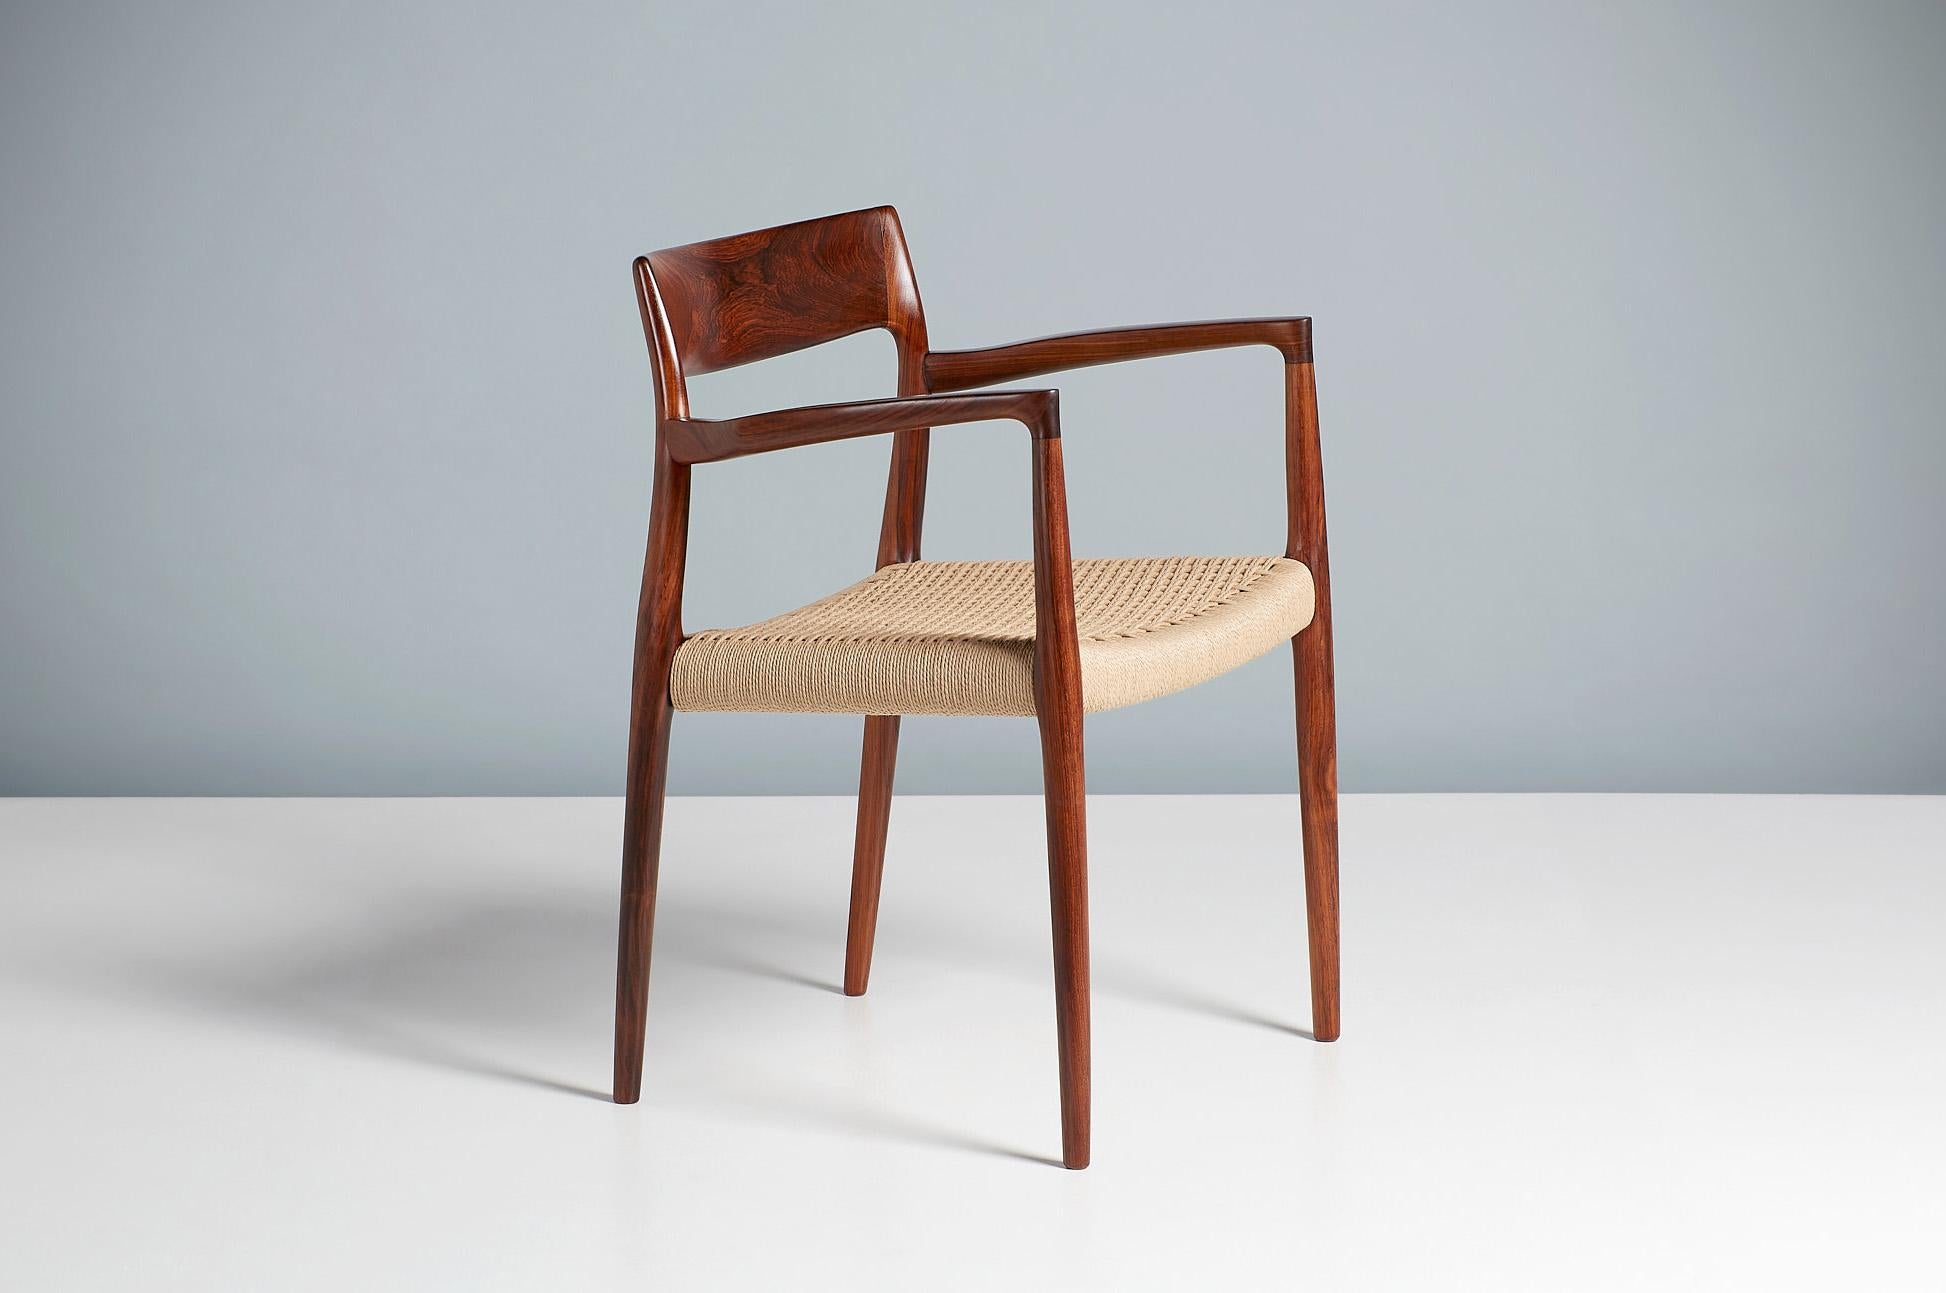 Niels O. Moller

Model 57 Carver chair, c1959

Iconic carver chair produced in stunning, highly figured rosewood by J.L. Moller Mobelfabrik, Denmark in c1959. The frame has been carefully cleaned and oil and the seat has a newly woven papercord